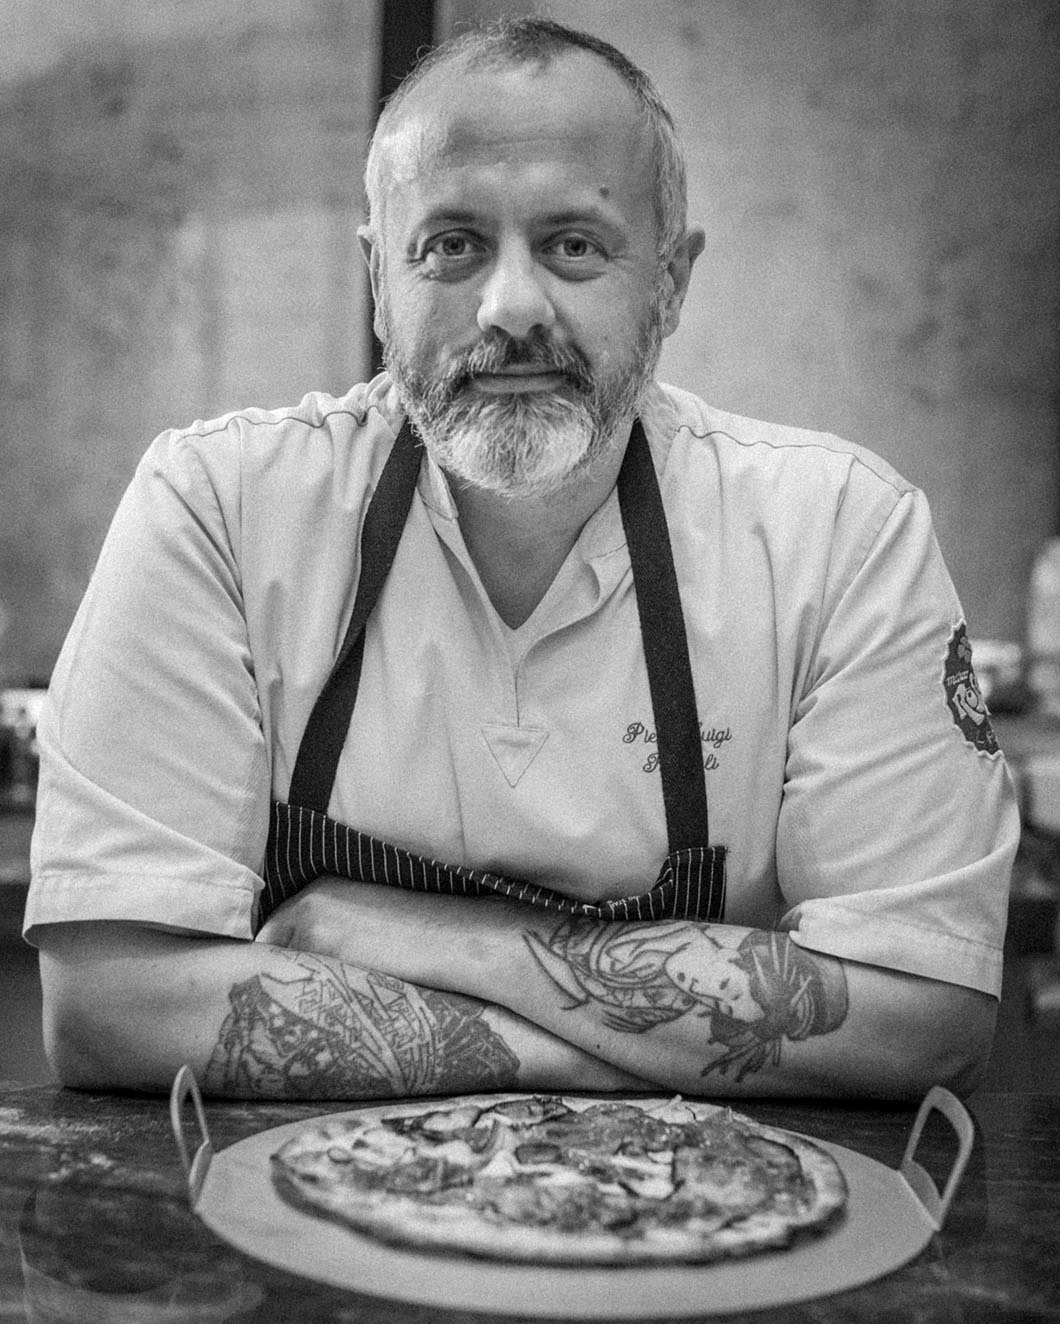 A master pizza chef posing for a portrait